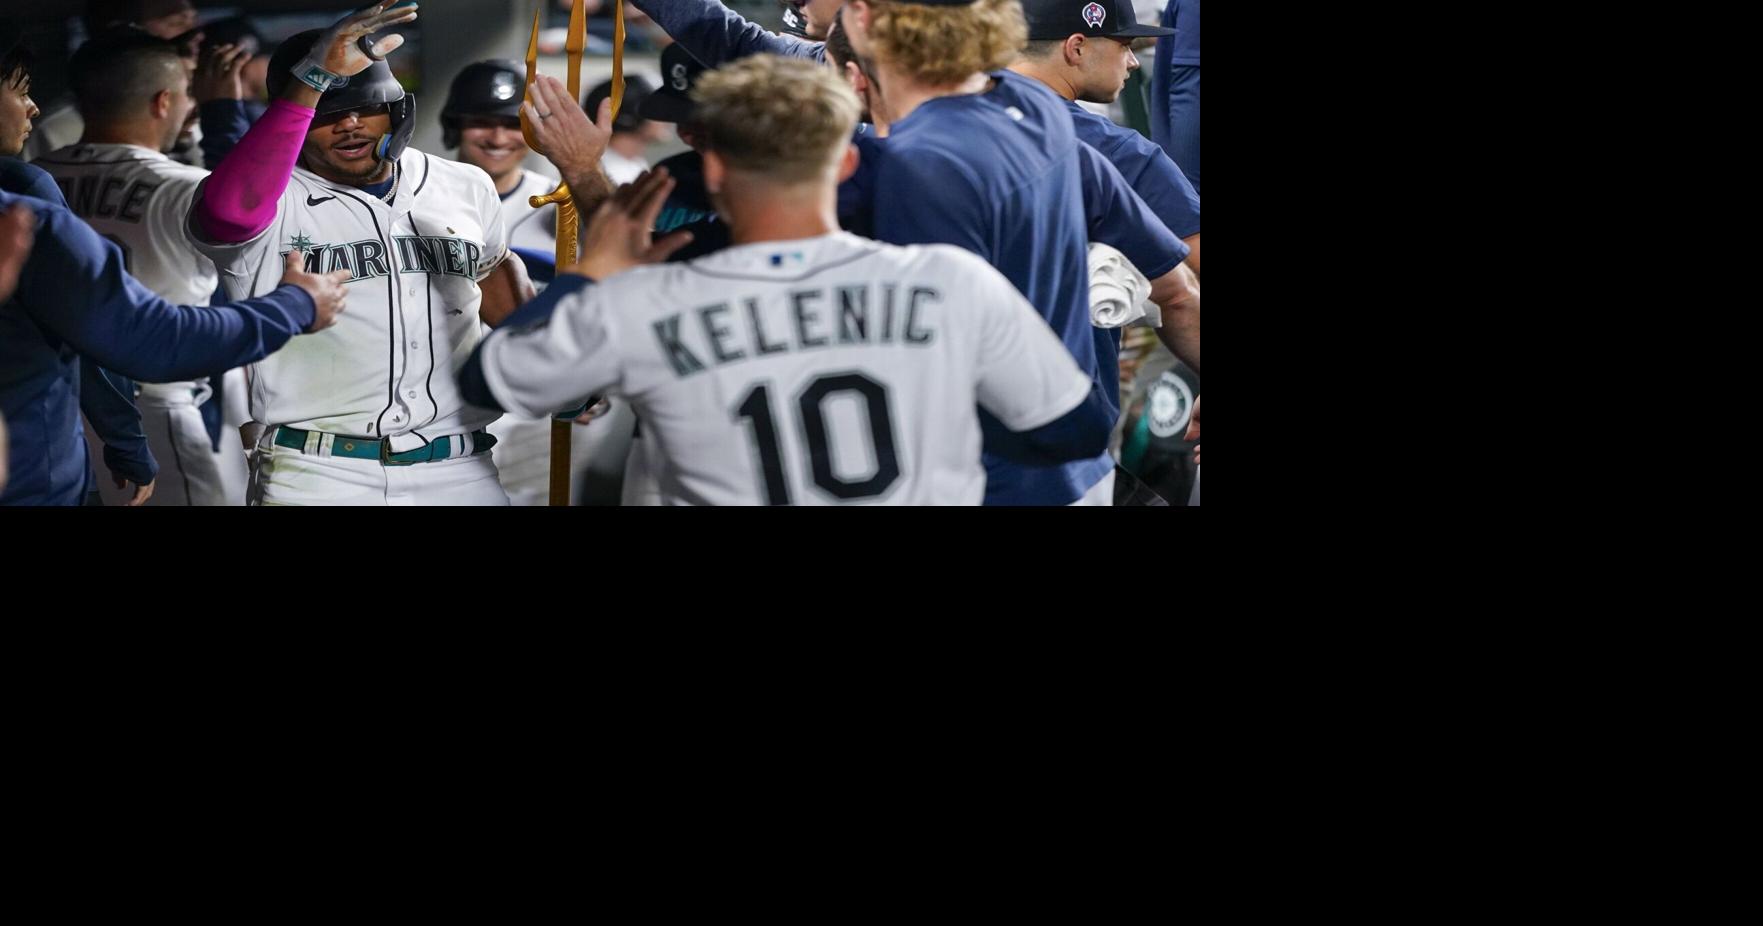 Mariners' latest playoff odds following series-opening loss to